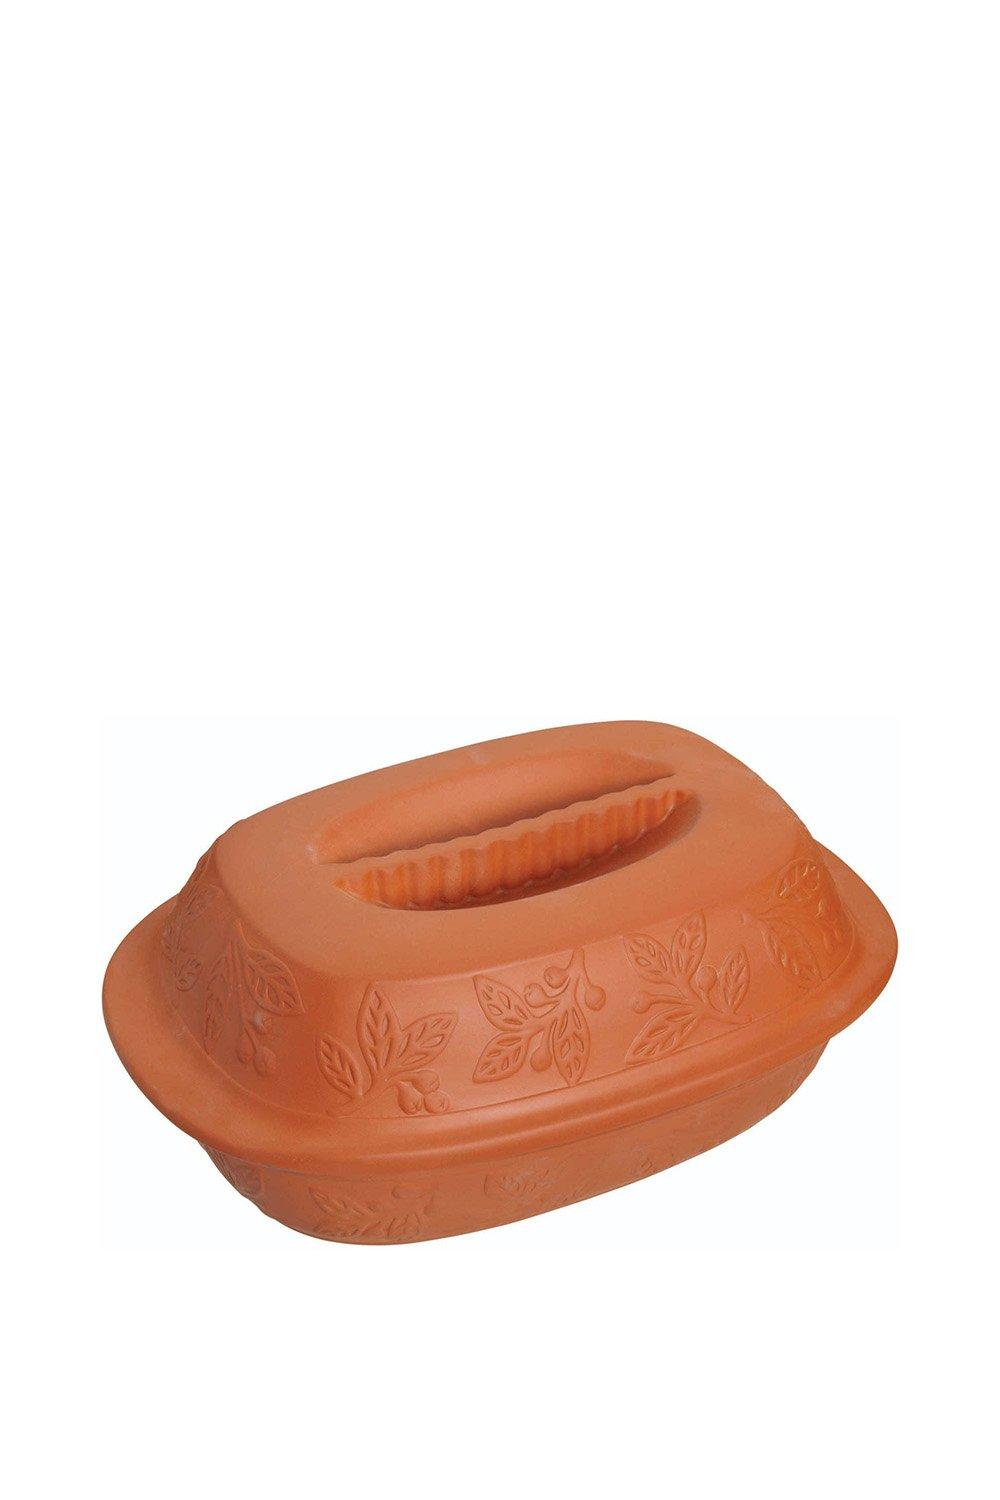 Terracotta Roasting Pot with Lid